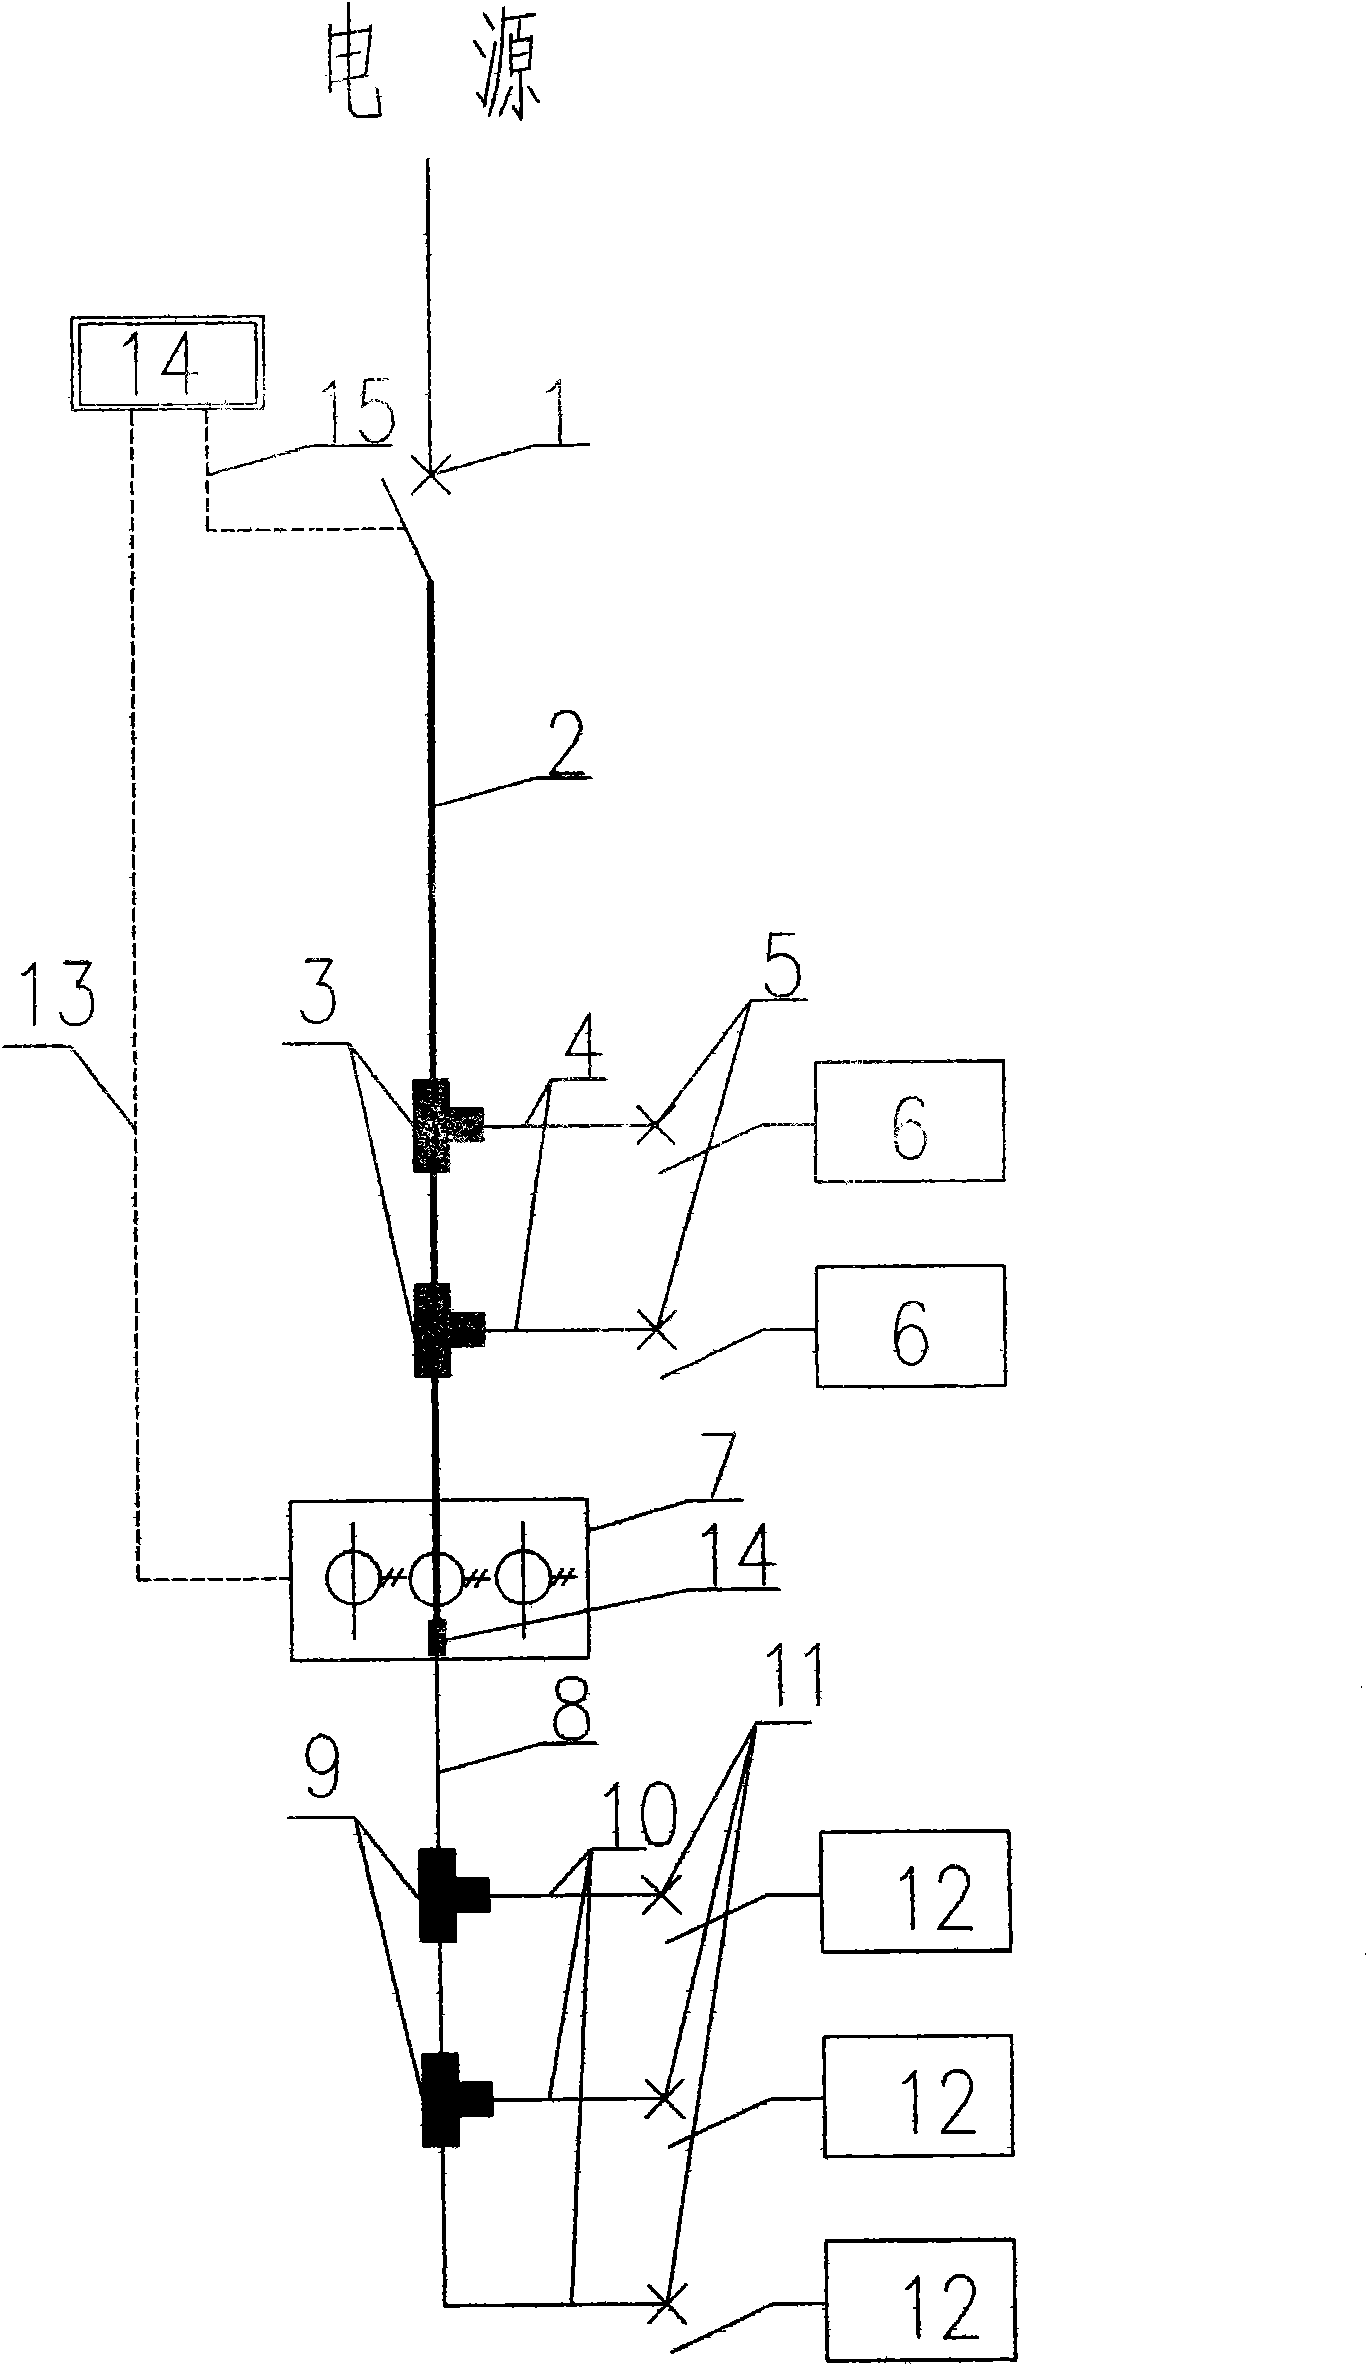 Power supply and distribution method for low-voltage system